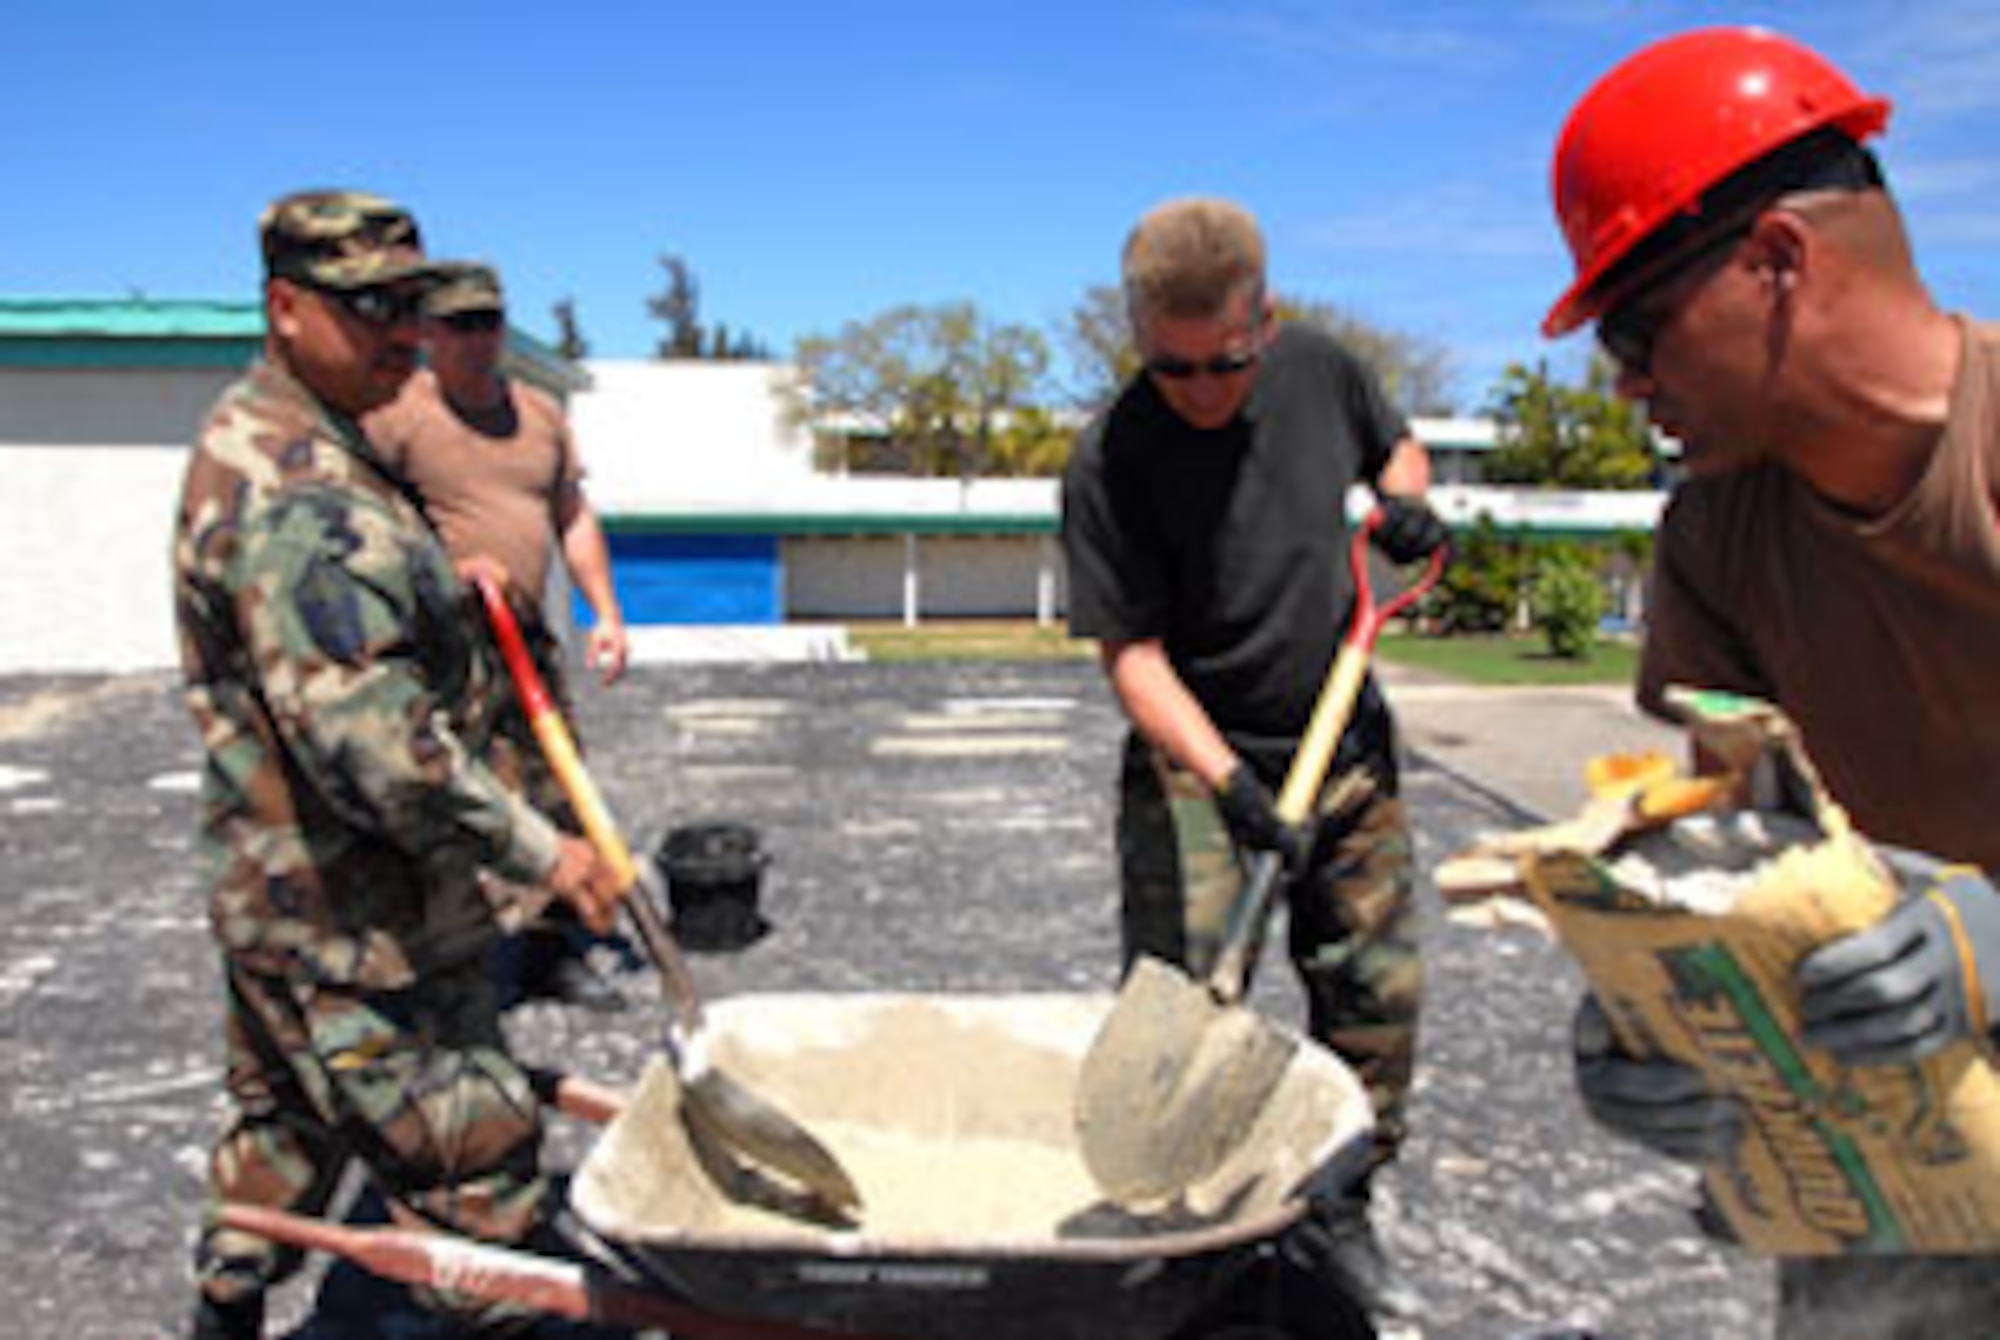 California Air National Guard members Master Sgt. Moses Alvarado (left to right), Tech. Sgt. Greg Jackson, Tech. Sgt. Paul Gomez and Stacy Burnside, all from the 163d RW, March Air Reserve Base, Calif., mix cement in the plaza during a building renovation on Coast Guard Air Station Borinquen, Puerto Rico. (U.S. Air Force photos by Senior Airman Diane Ducat/163d RW)